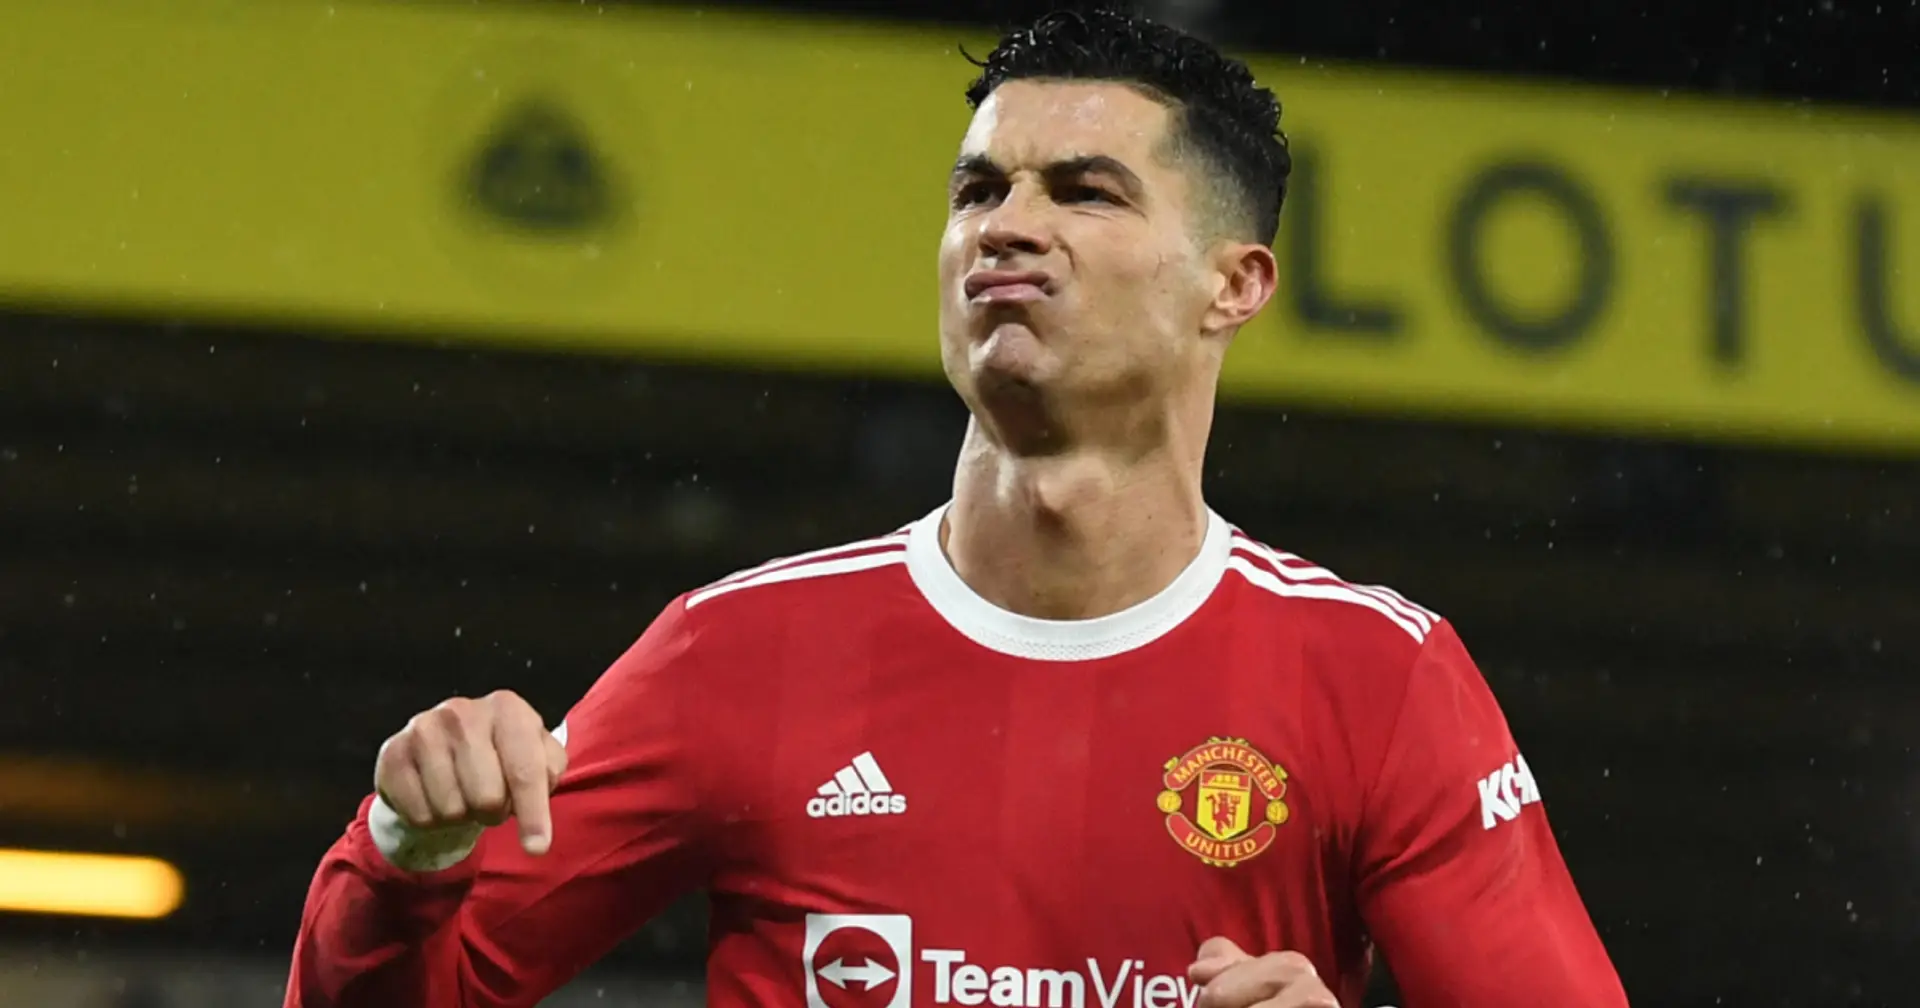 Man United insist Ronaldo is not for sale (reliability: 5 stars)